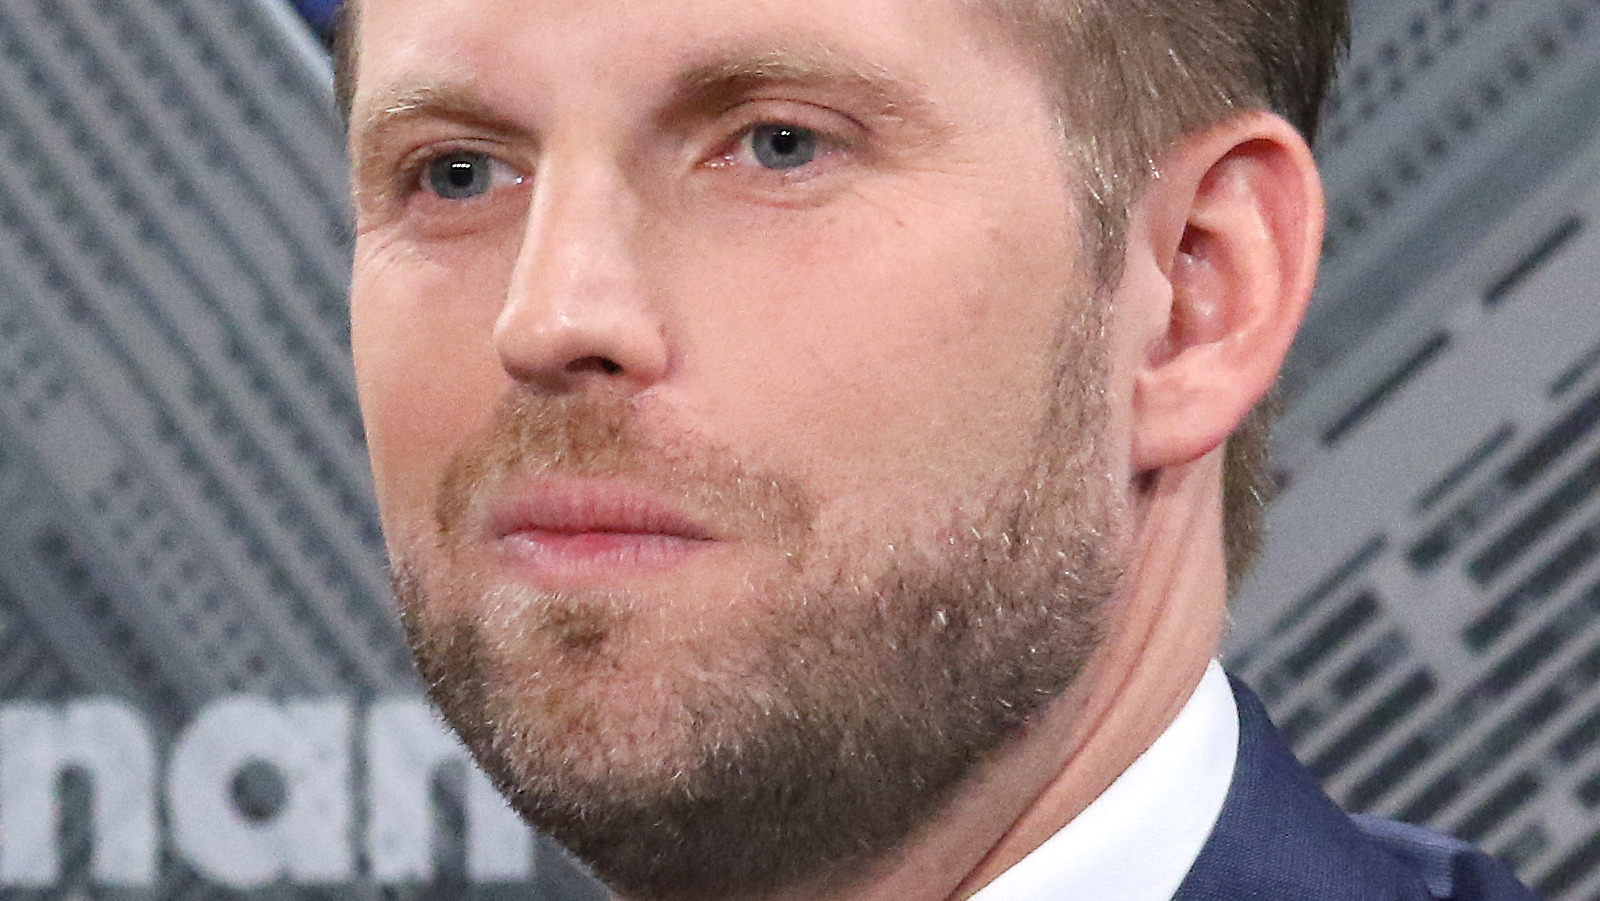 Eric Trump Claimed That He Raised $25 Million By The Age of 30